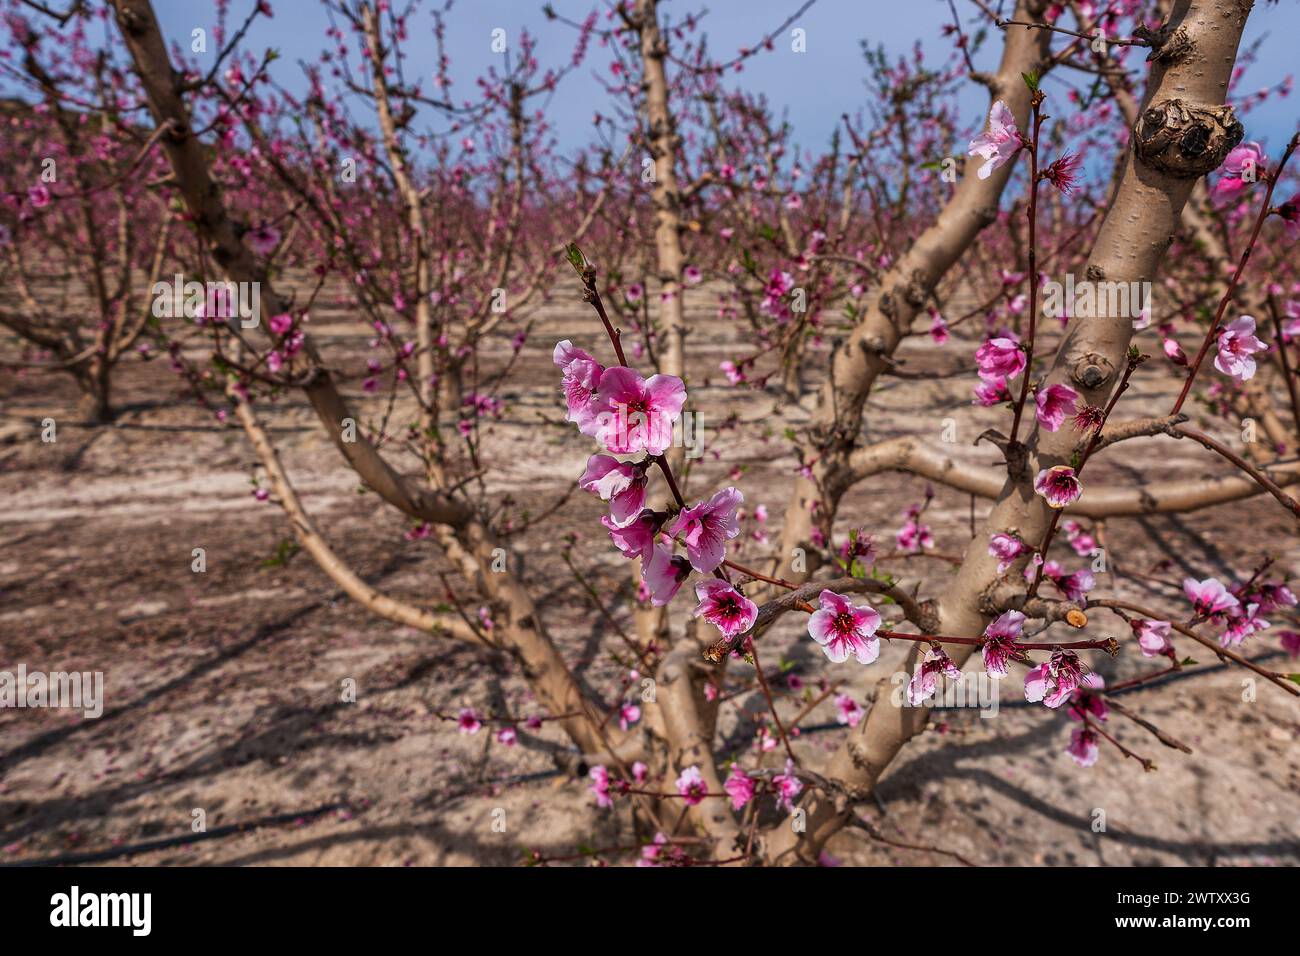 A plant in a desert environment with blossoming flowers sprouting from its branches Stock Photo